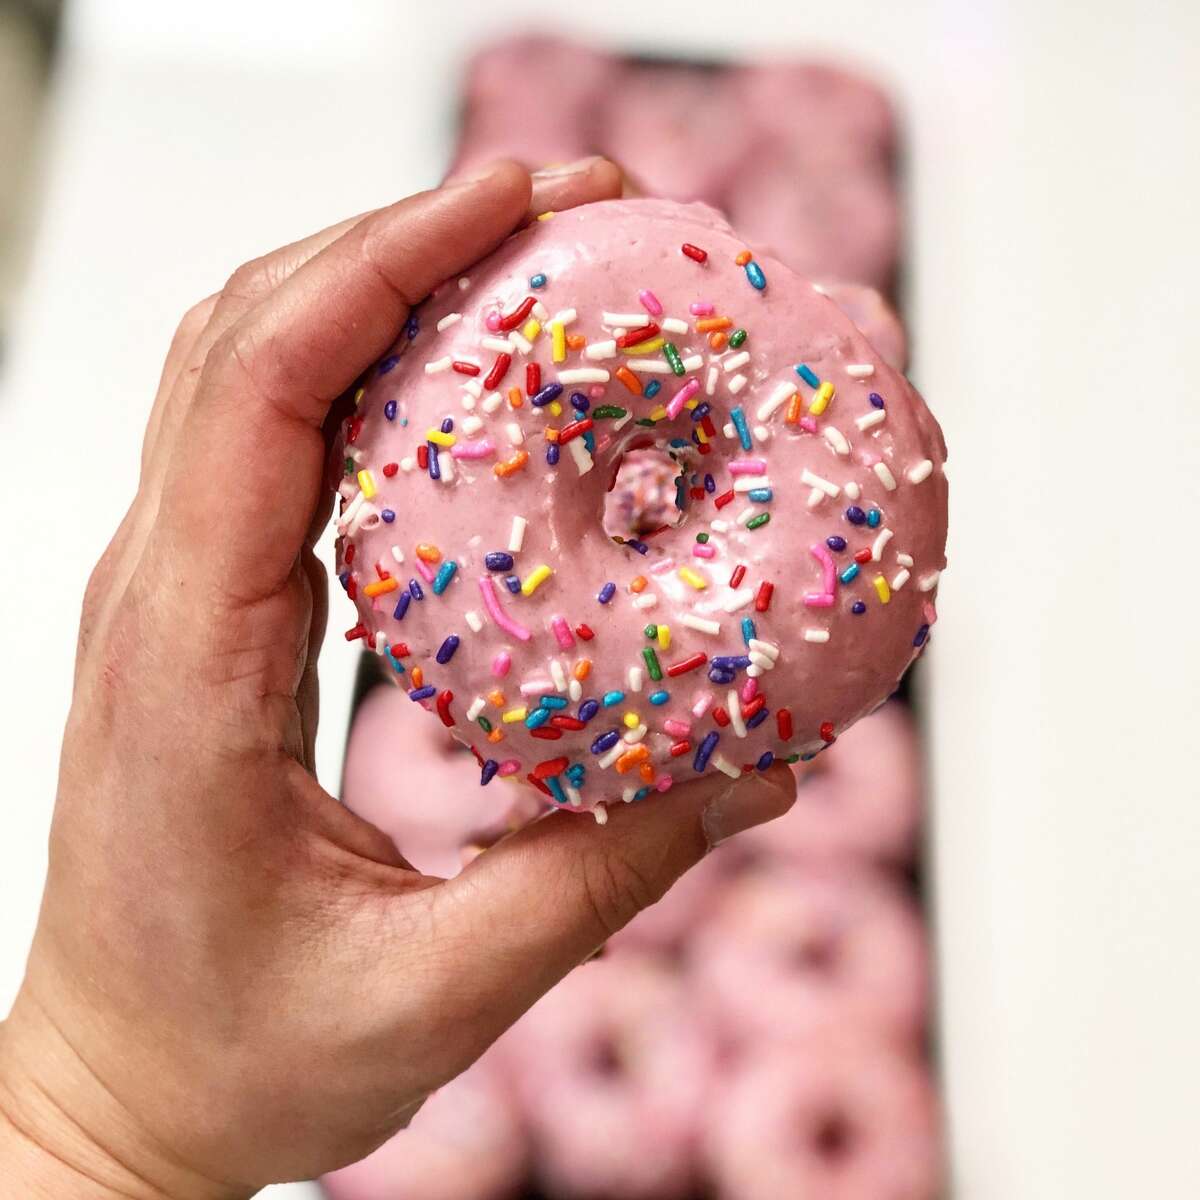 The University District's Donut Factory doles out nod-worthy doughnuts. Keep clicking for more of the most popular doughnuts around Seattle.